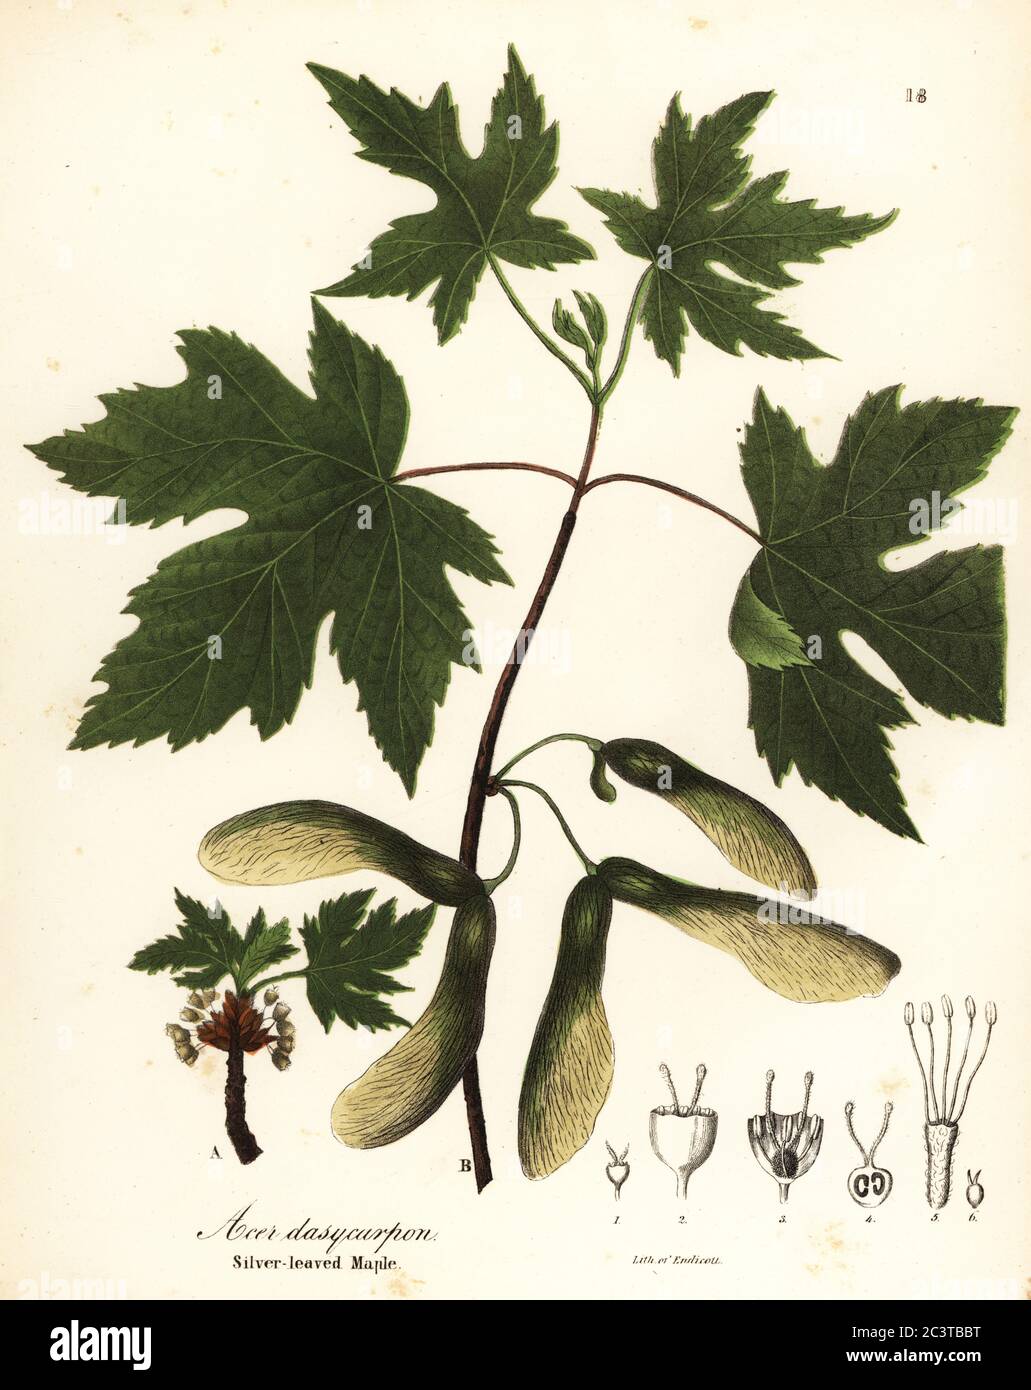 Silver maple, Acer saccharinum (Silver-leaved maple, Acer dasycarpum). Handcoloured lithograph by Endicott after a botanical illustration from John Torrey’s A Flora of the State of New York, Carroll and Cook, Albany, 1843. The plates drawn by John Torrey, Agnes Mitchell, Elizabeth Paoley and Swinton. John Torrey was an American botanist, chemist and physician 1796-1873. Stock Photo